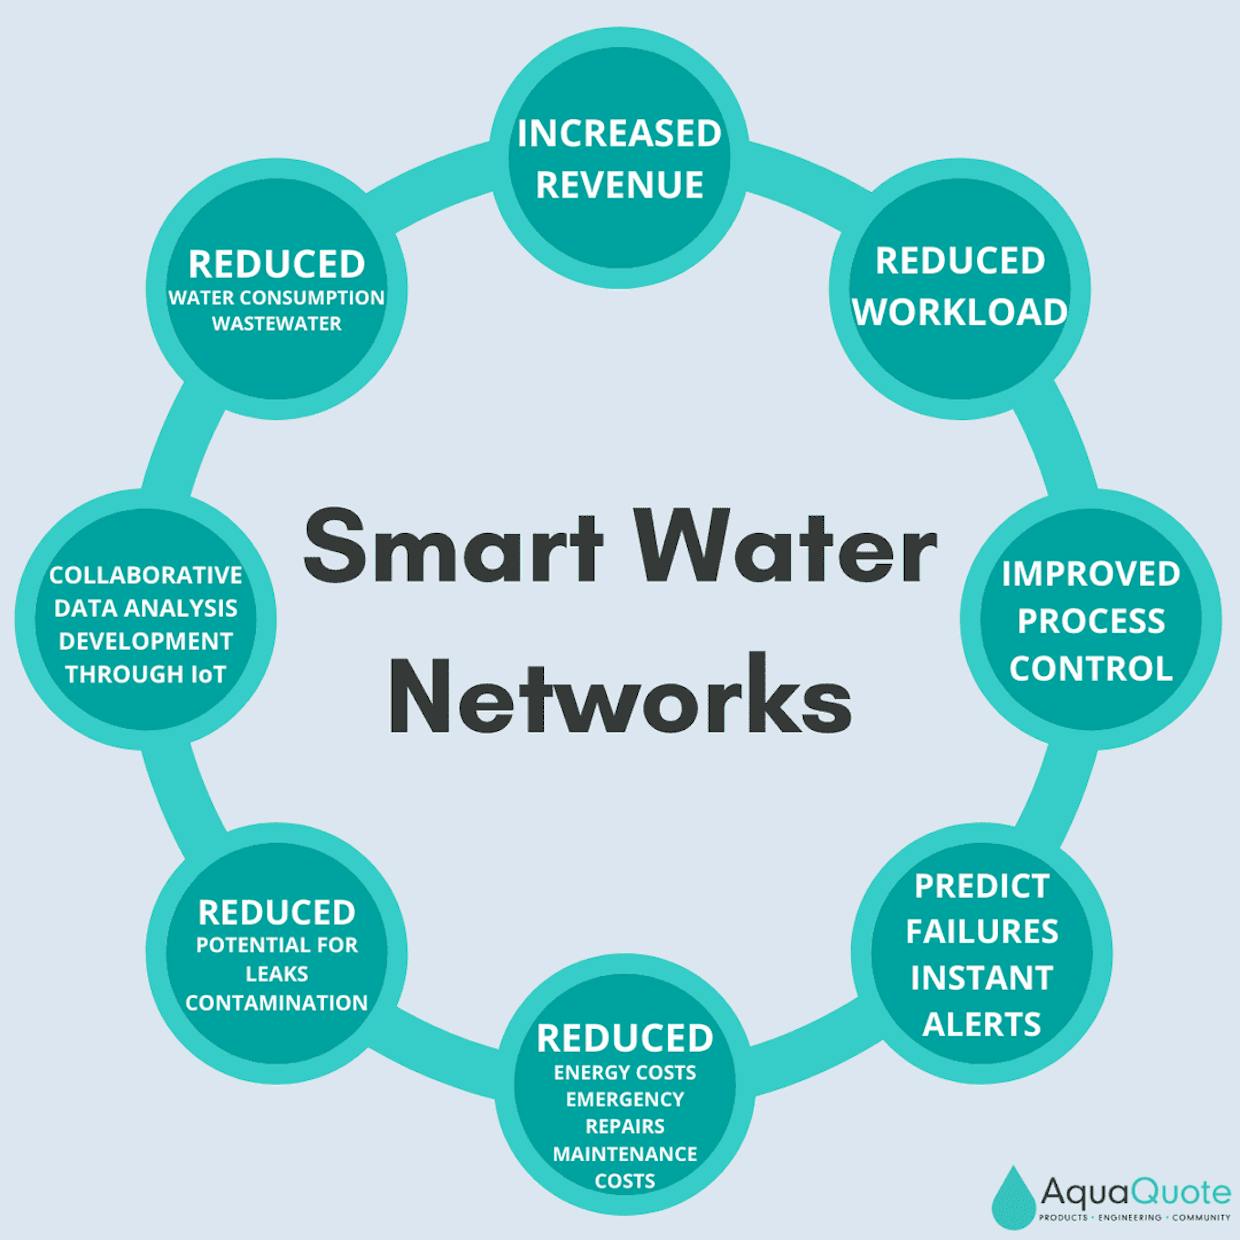 Benefits of Smart Networks & Internet of Things (IoT) Connectivity